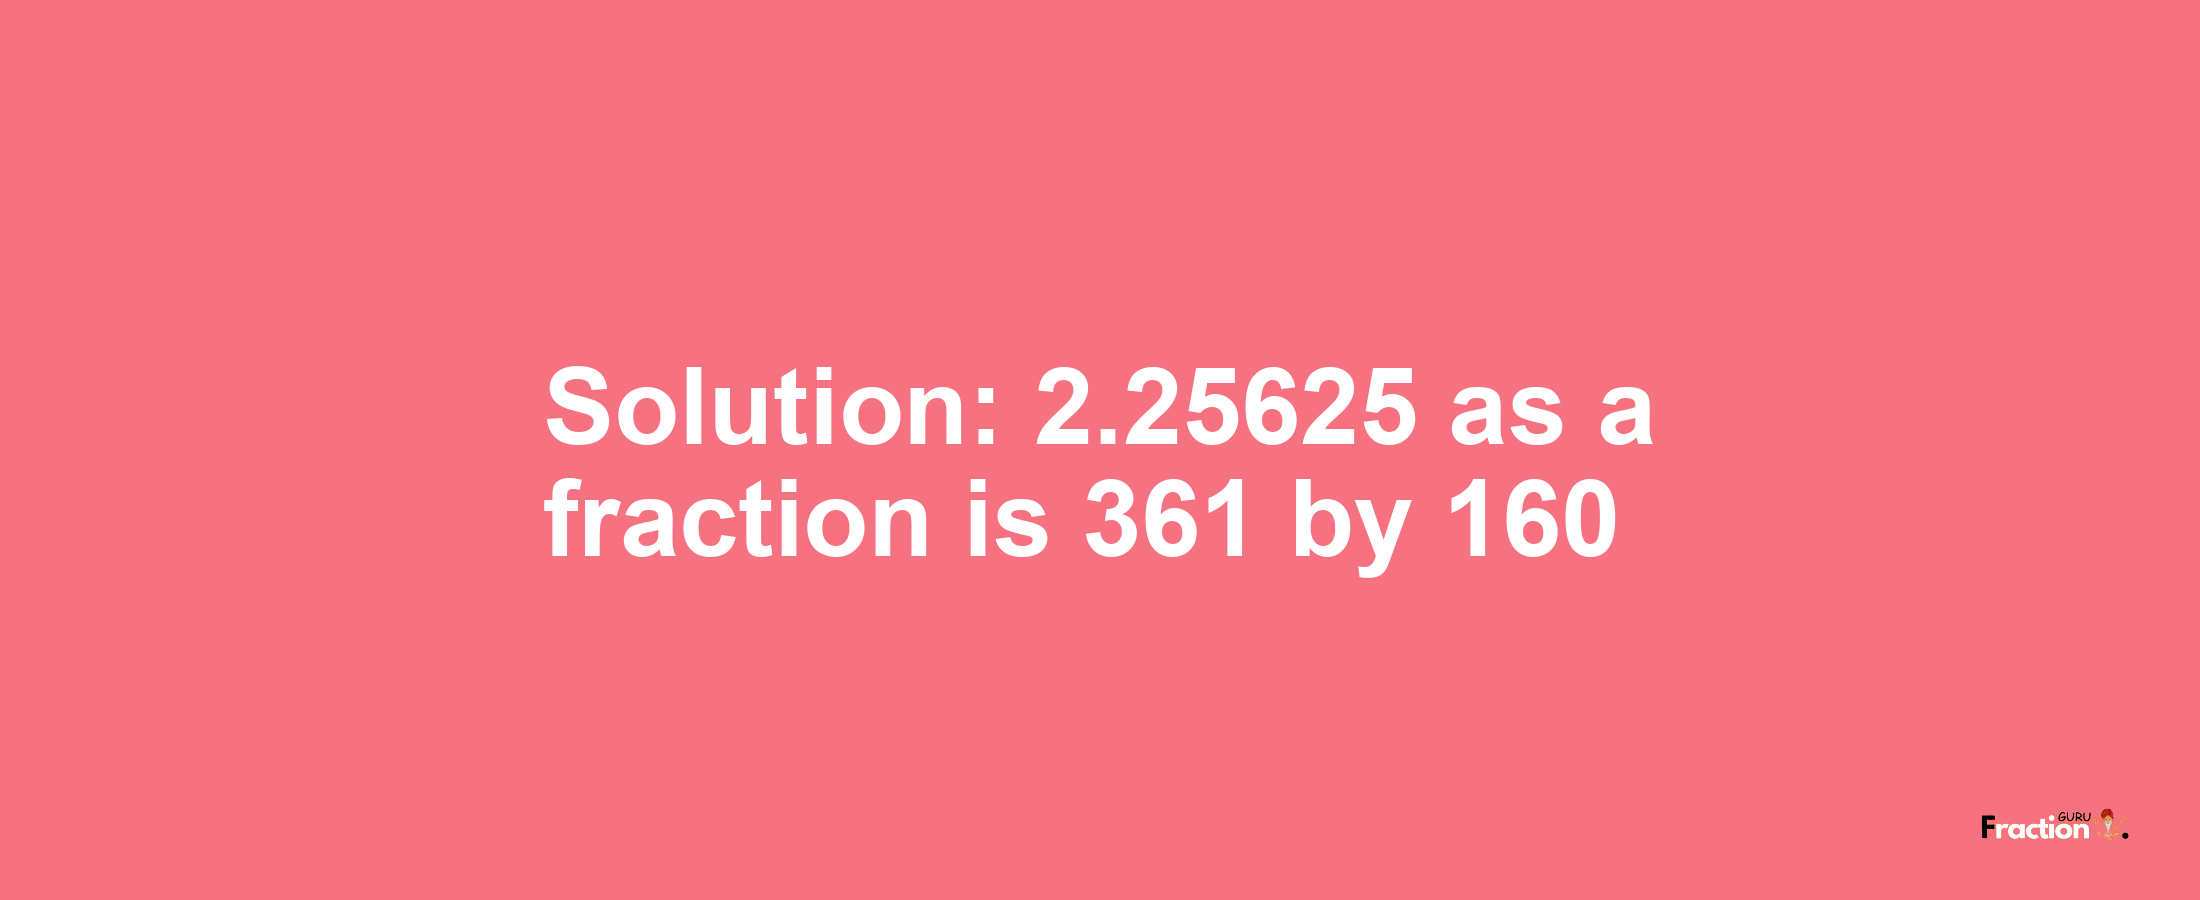 Solution:2.25625 as a fraction is 361/160